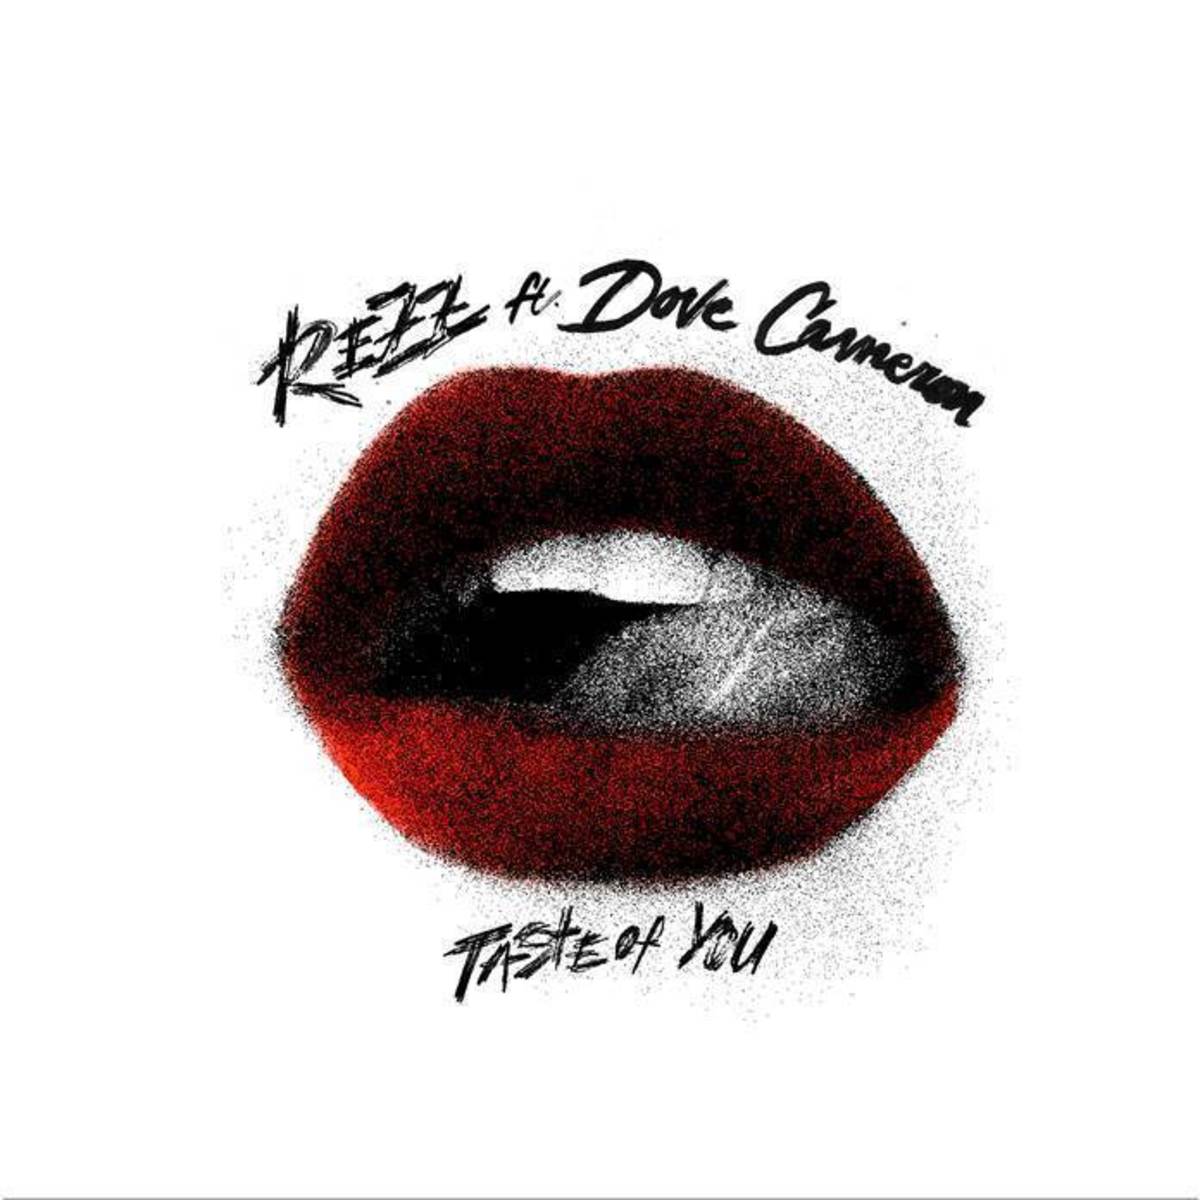 Artwork for REZZ and Dove Cameron's single "Taste Of You."